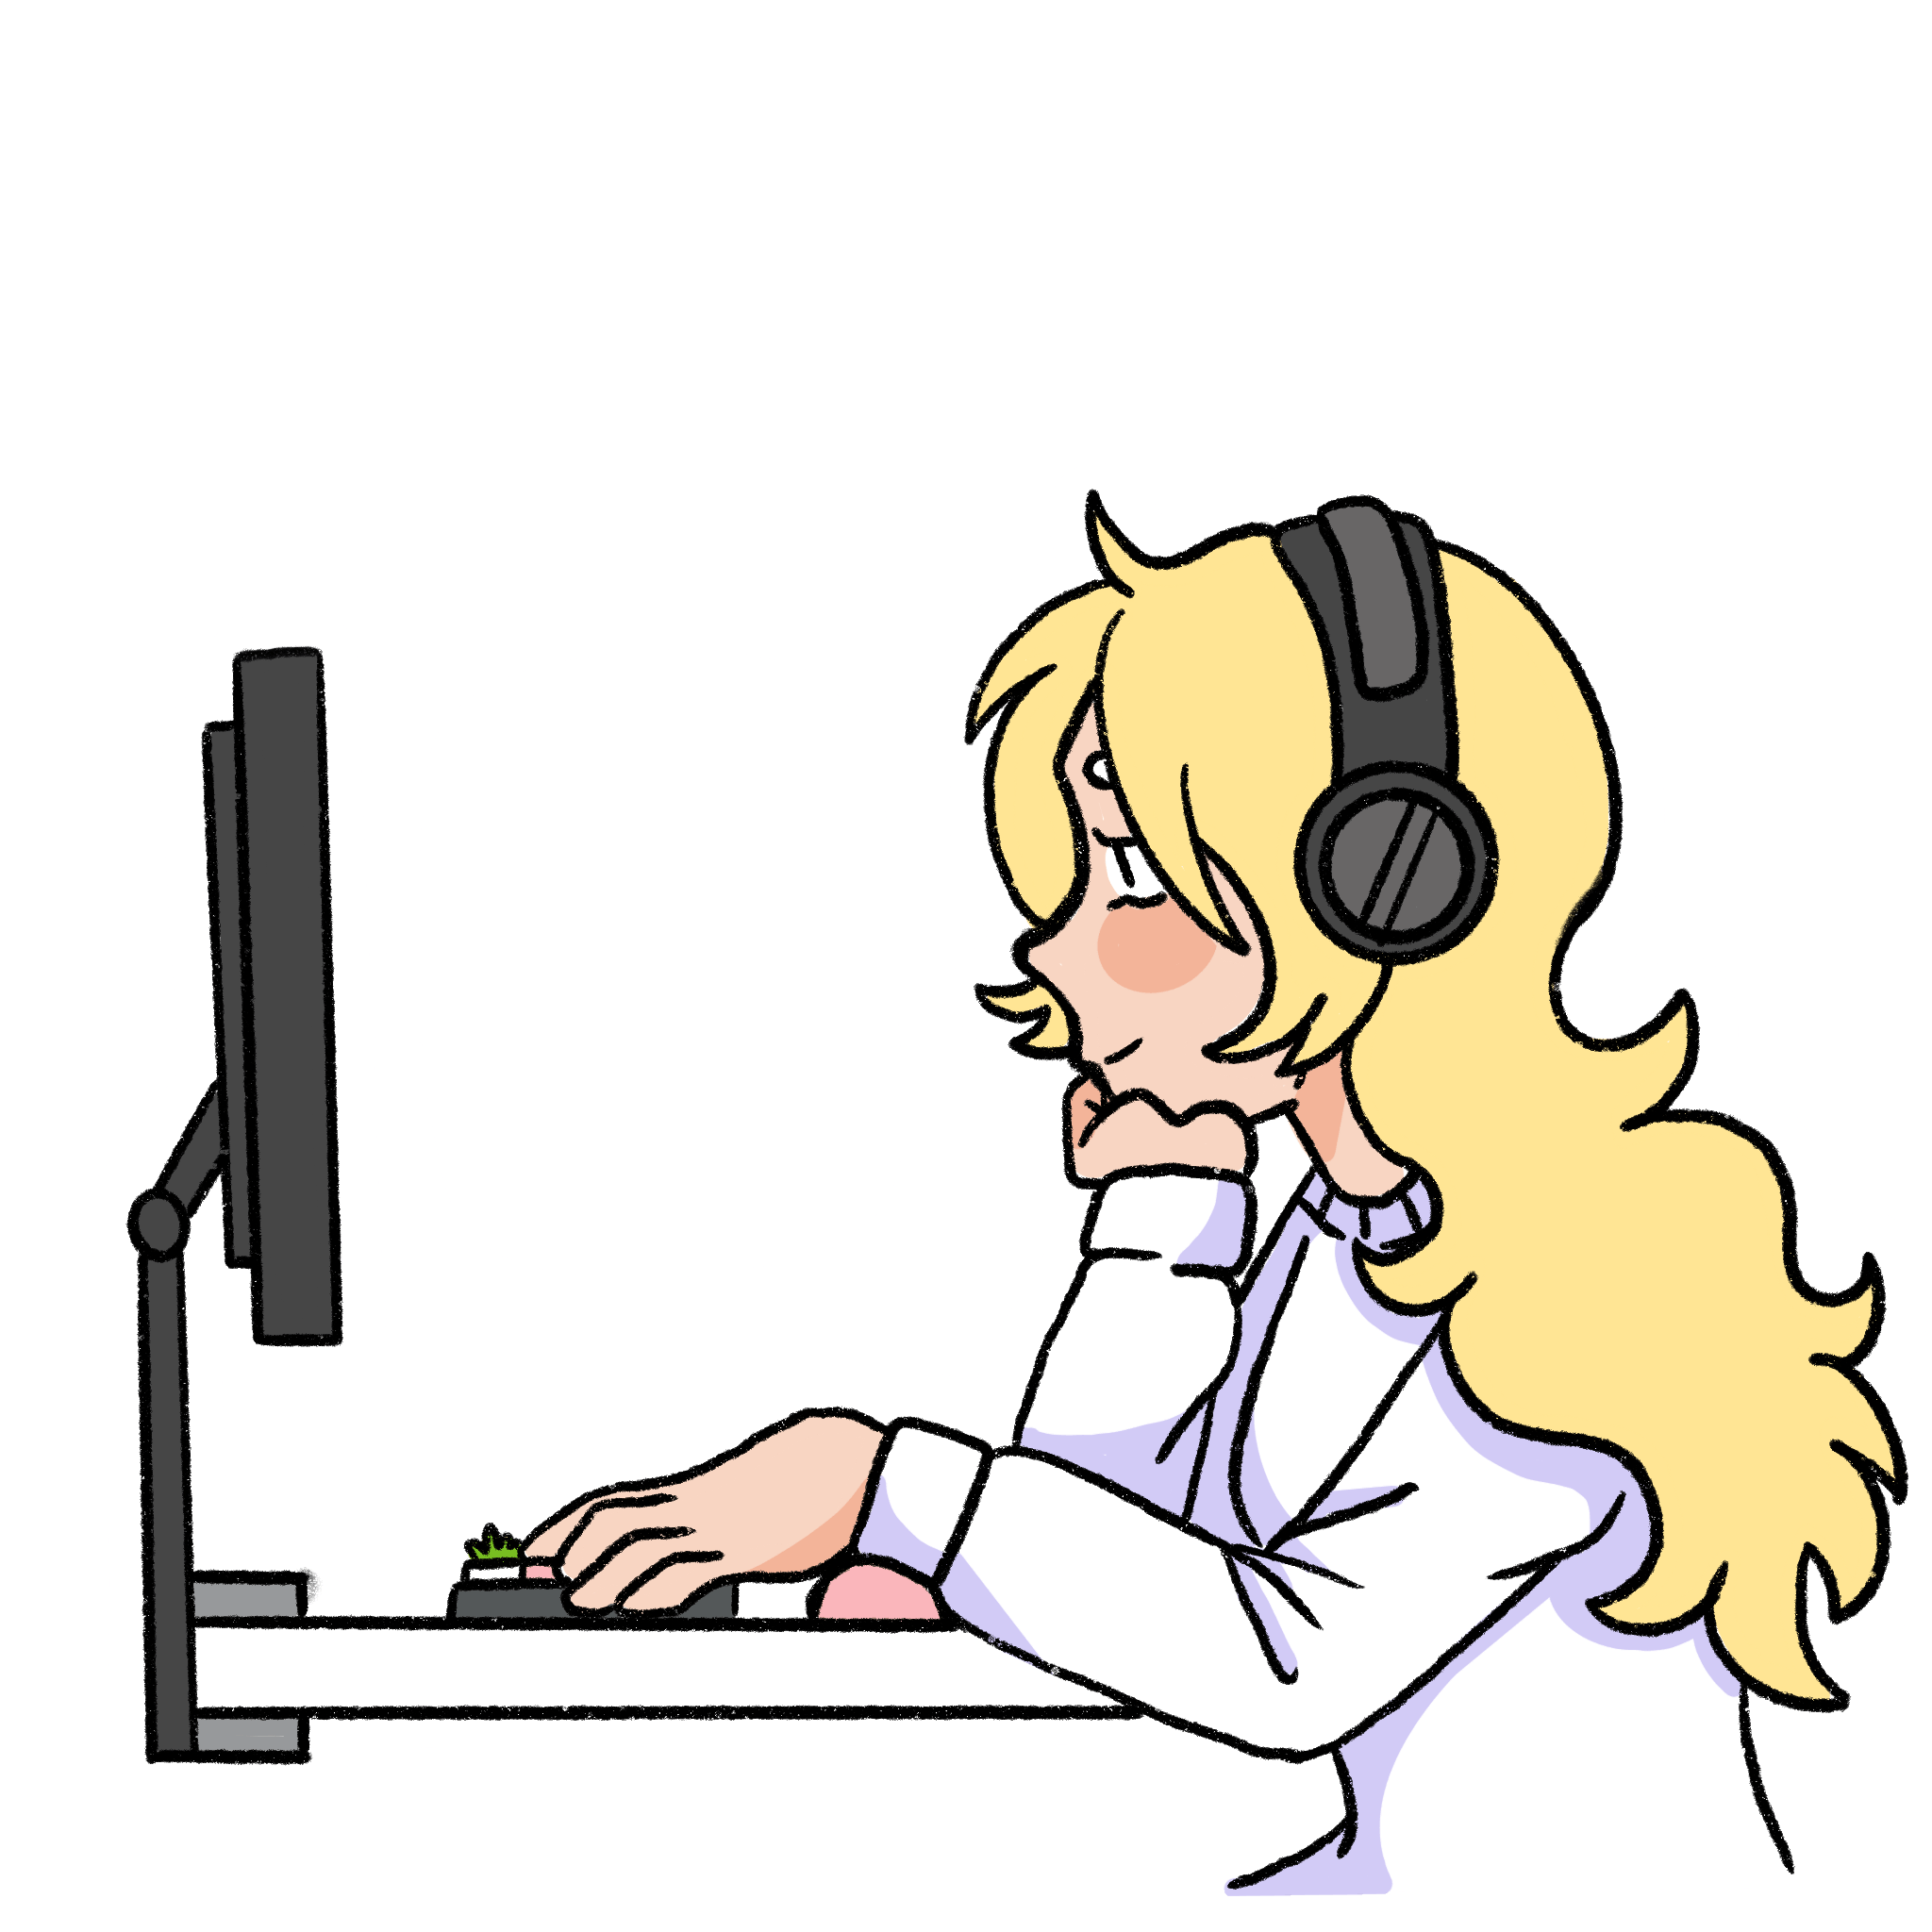 A drawing of me, a blonde woman in a white sweater with headphones on sitting at my desk in front of a keyboard and monitor coding.